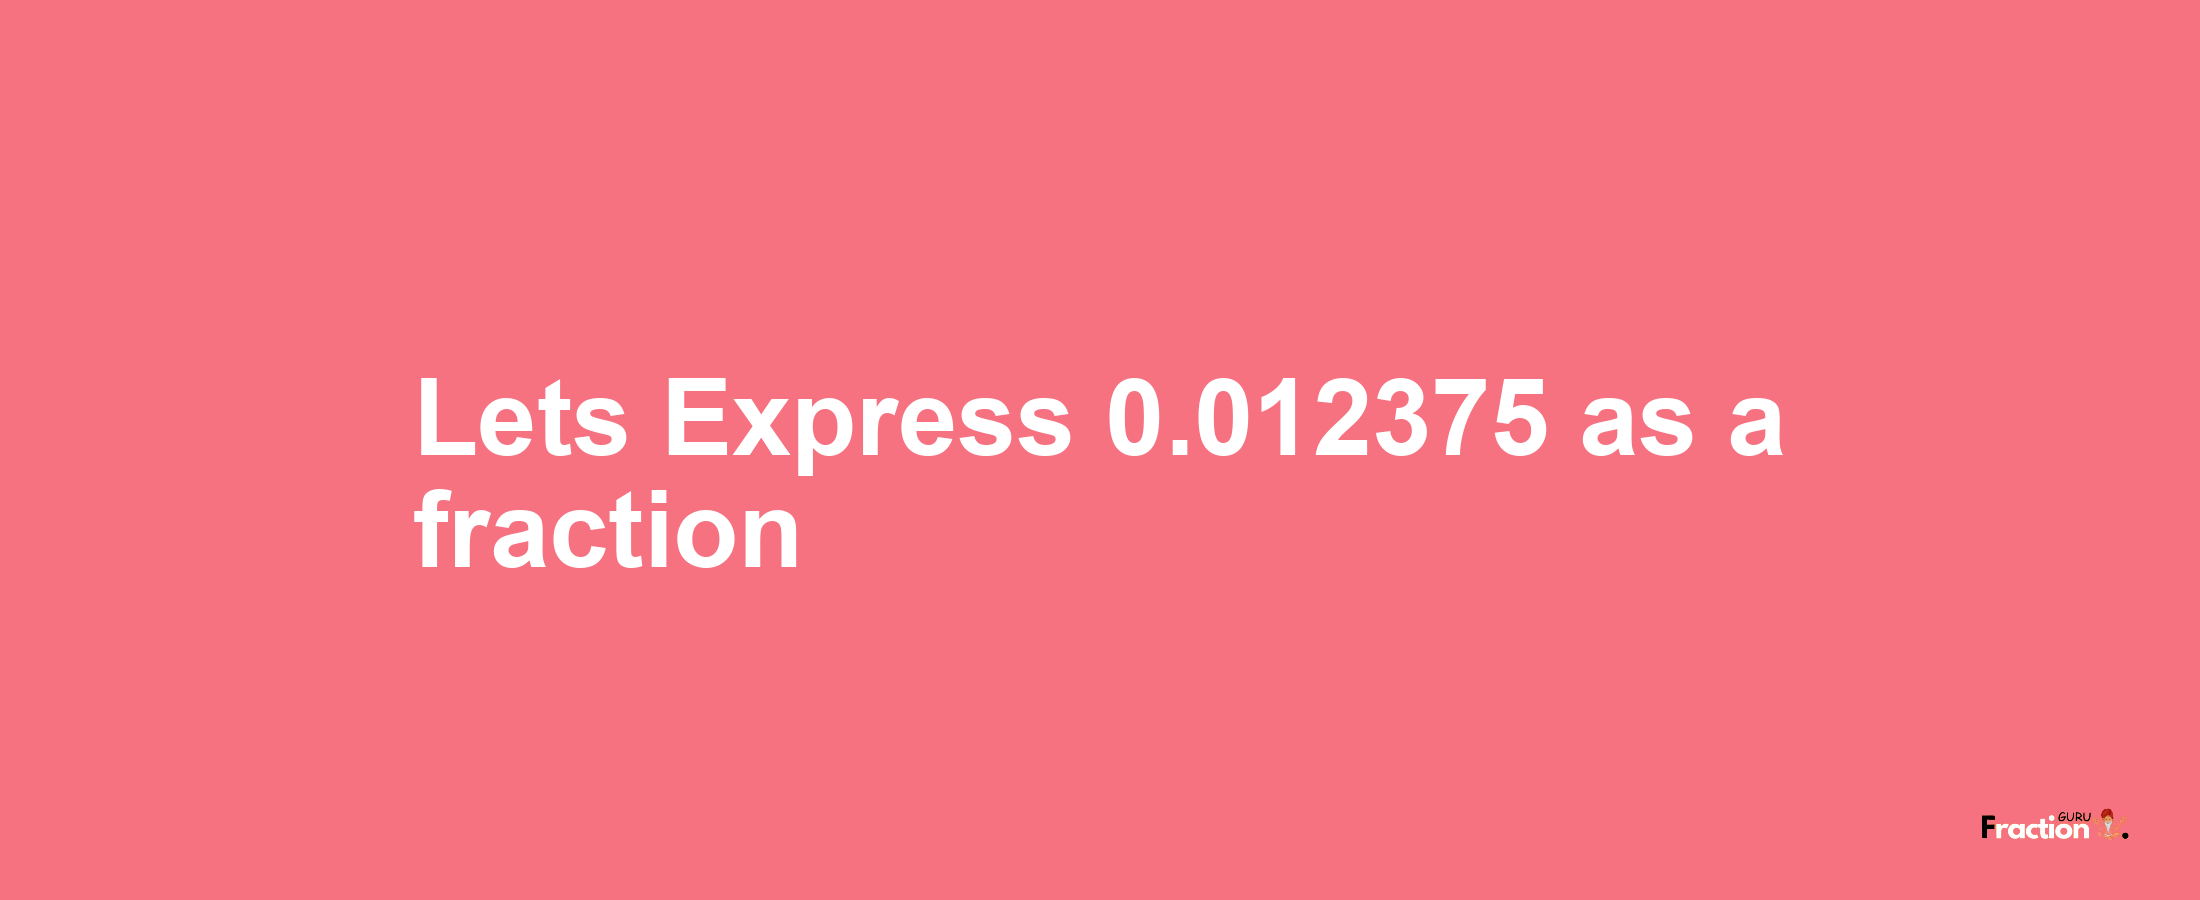 Lets Express 0.012375 as afraction